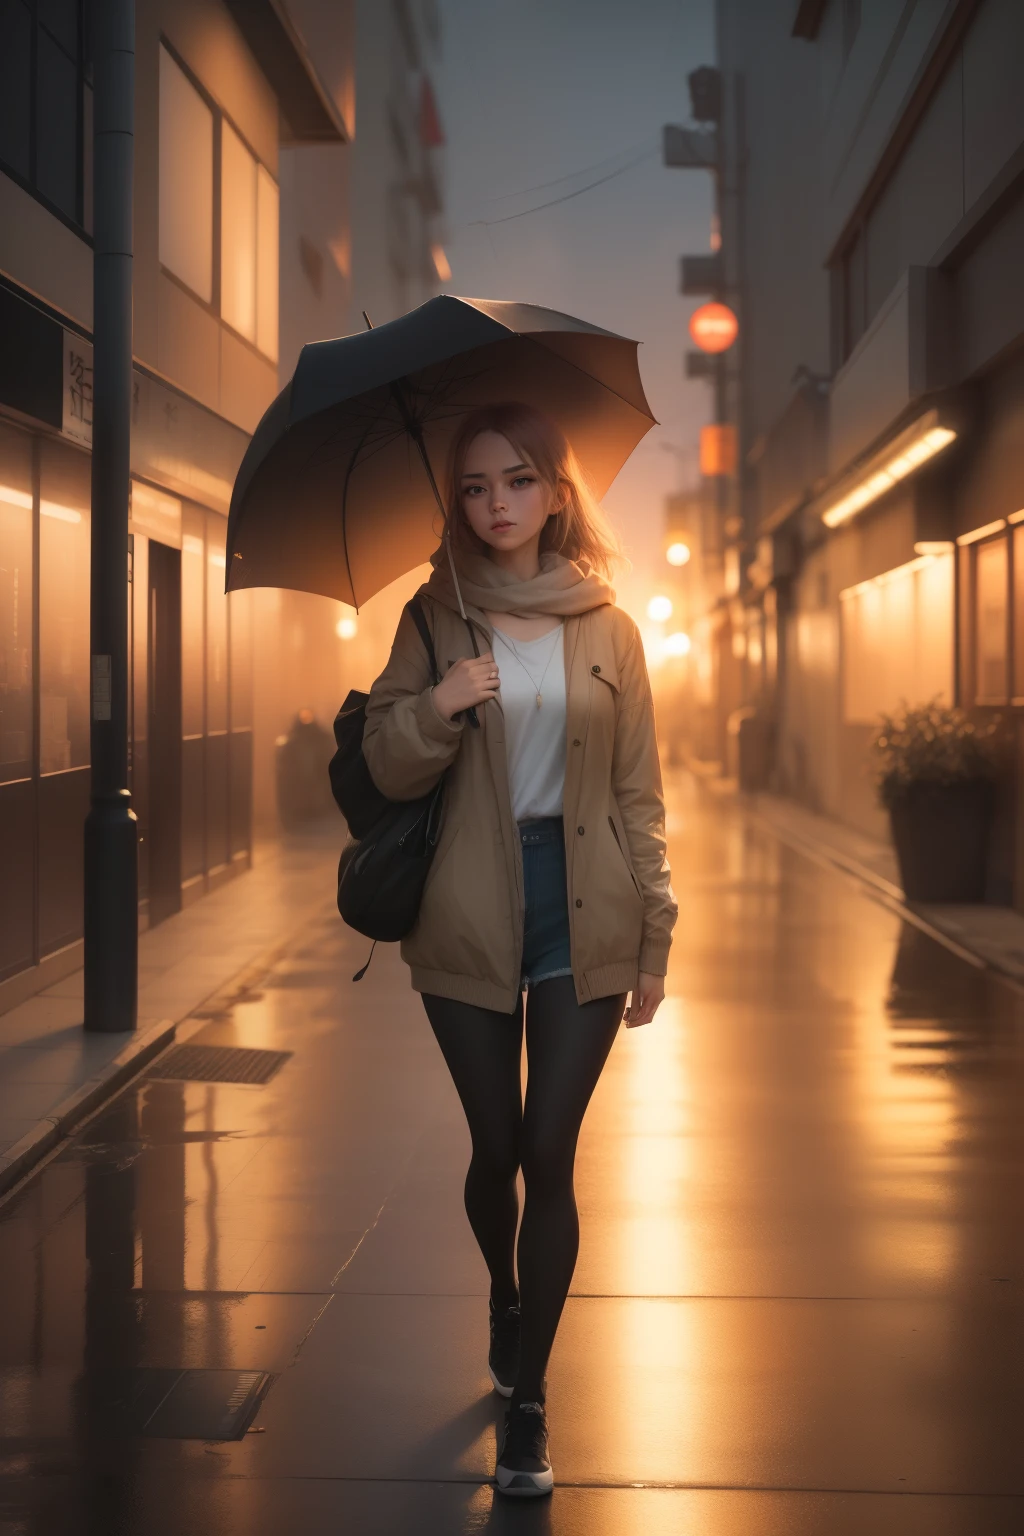 there is a young woman walking home with an umbrella, woman in her twenties, light rain, tokyo anime scene, style of alena aenami, calm sunset, beautiful anime scene, anime atmospheric, anime art wallpaper 4k, anime art wallpaper 8 k